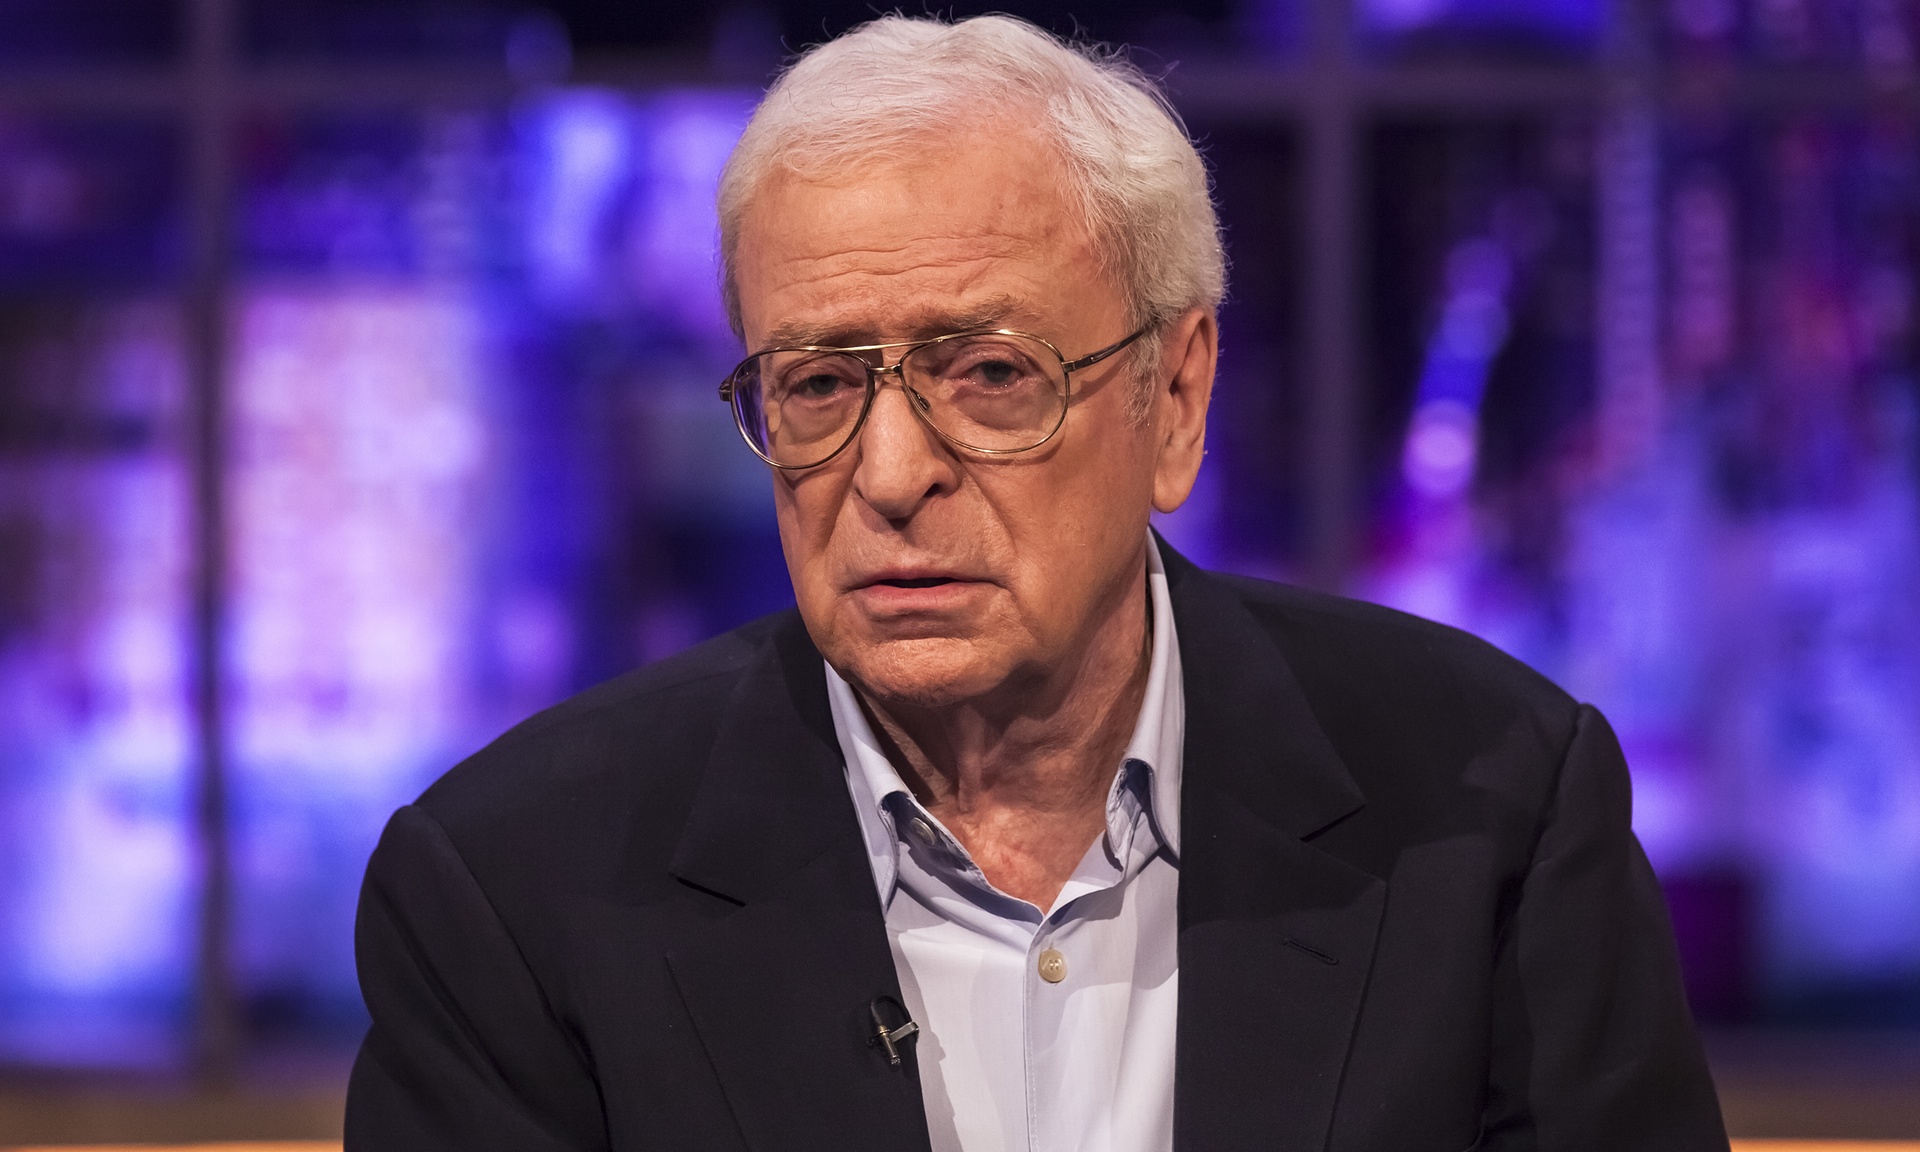 Michael Caine Opens Up About Issues With Alcohol | Film ...